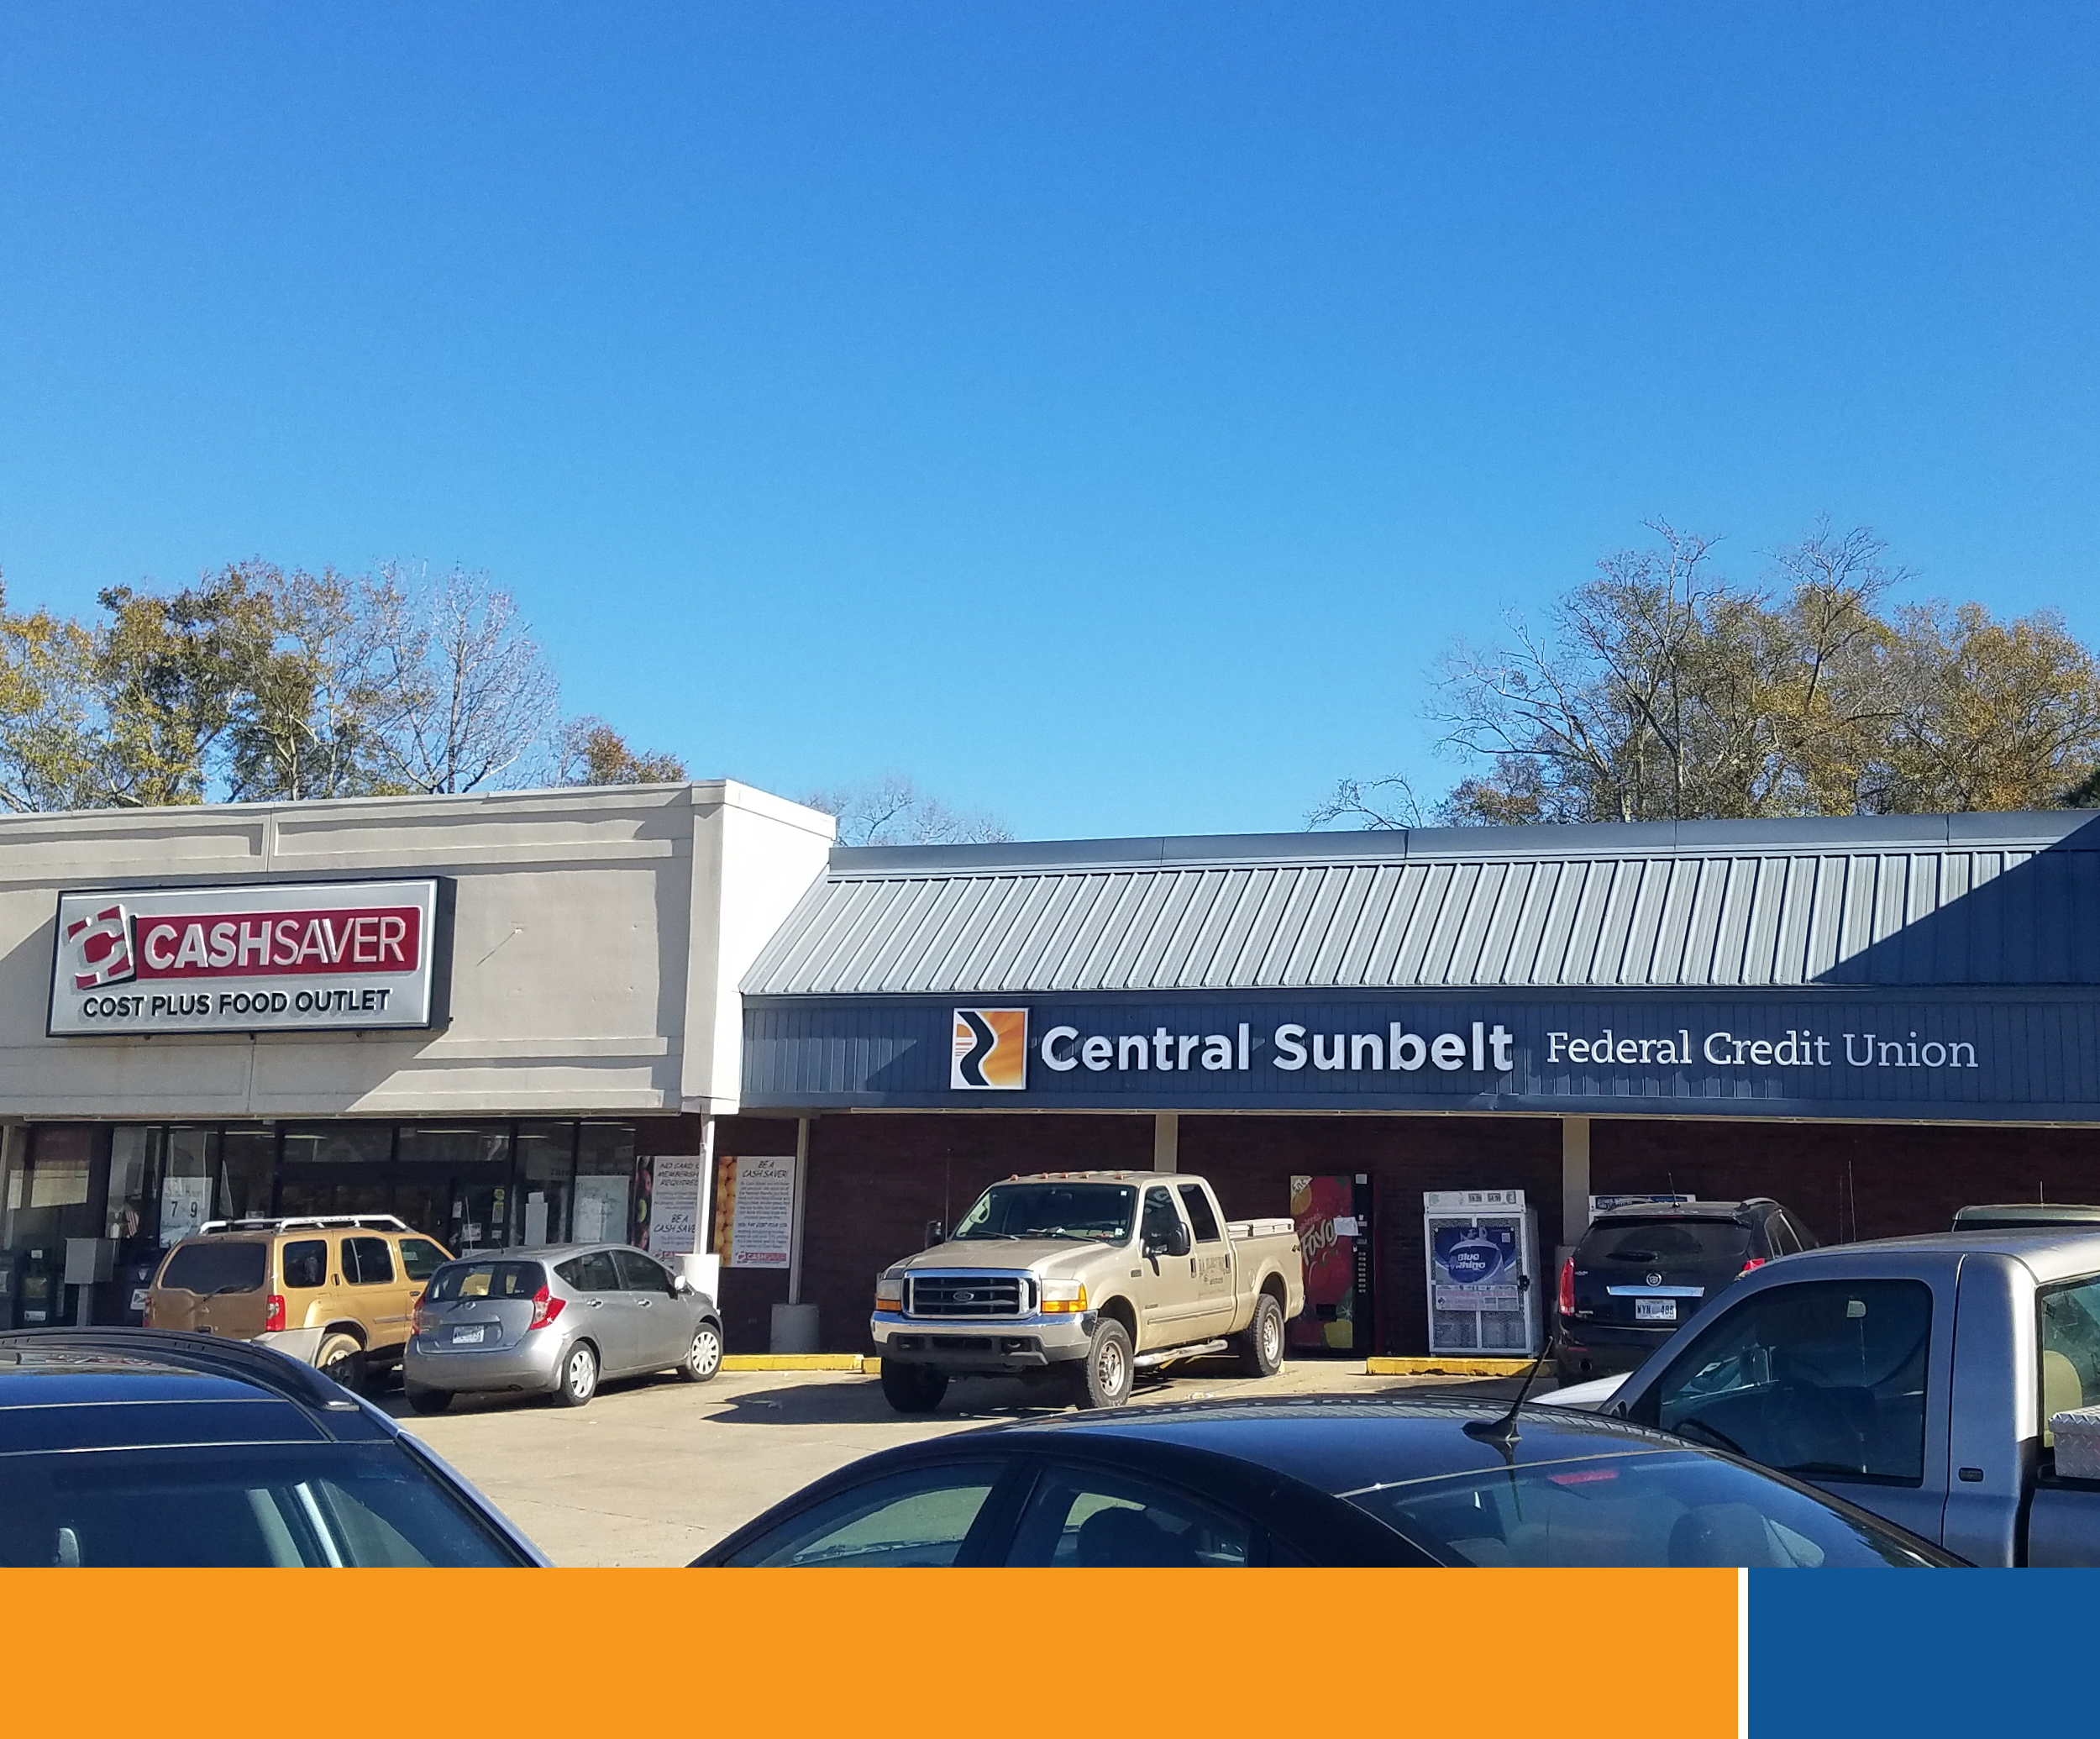 Central Sunbelt is celebrating their seventh full-service branch opening in Mississippi